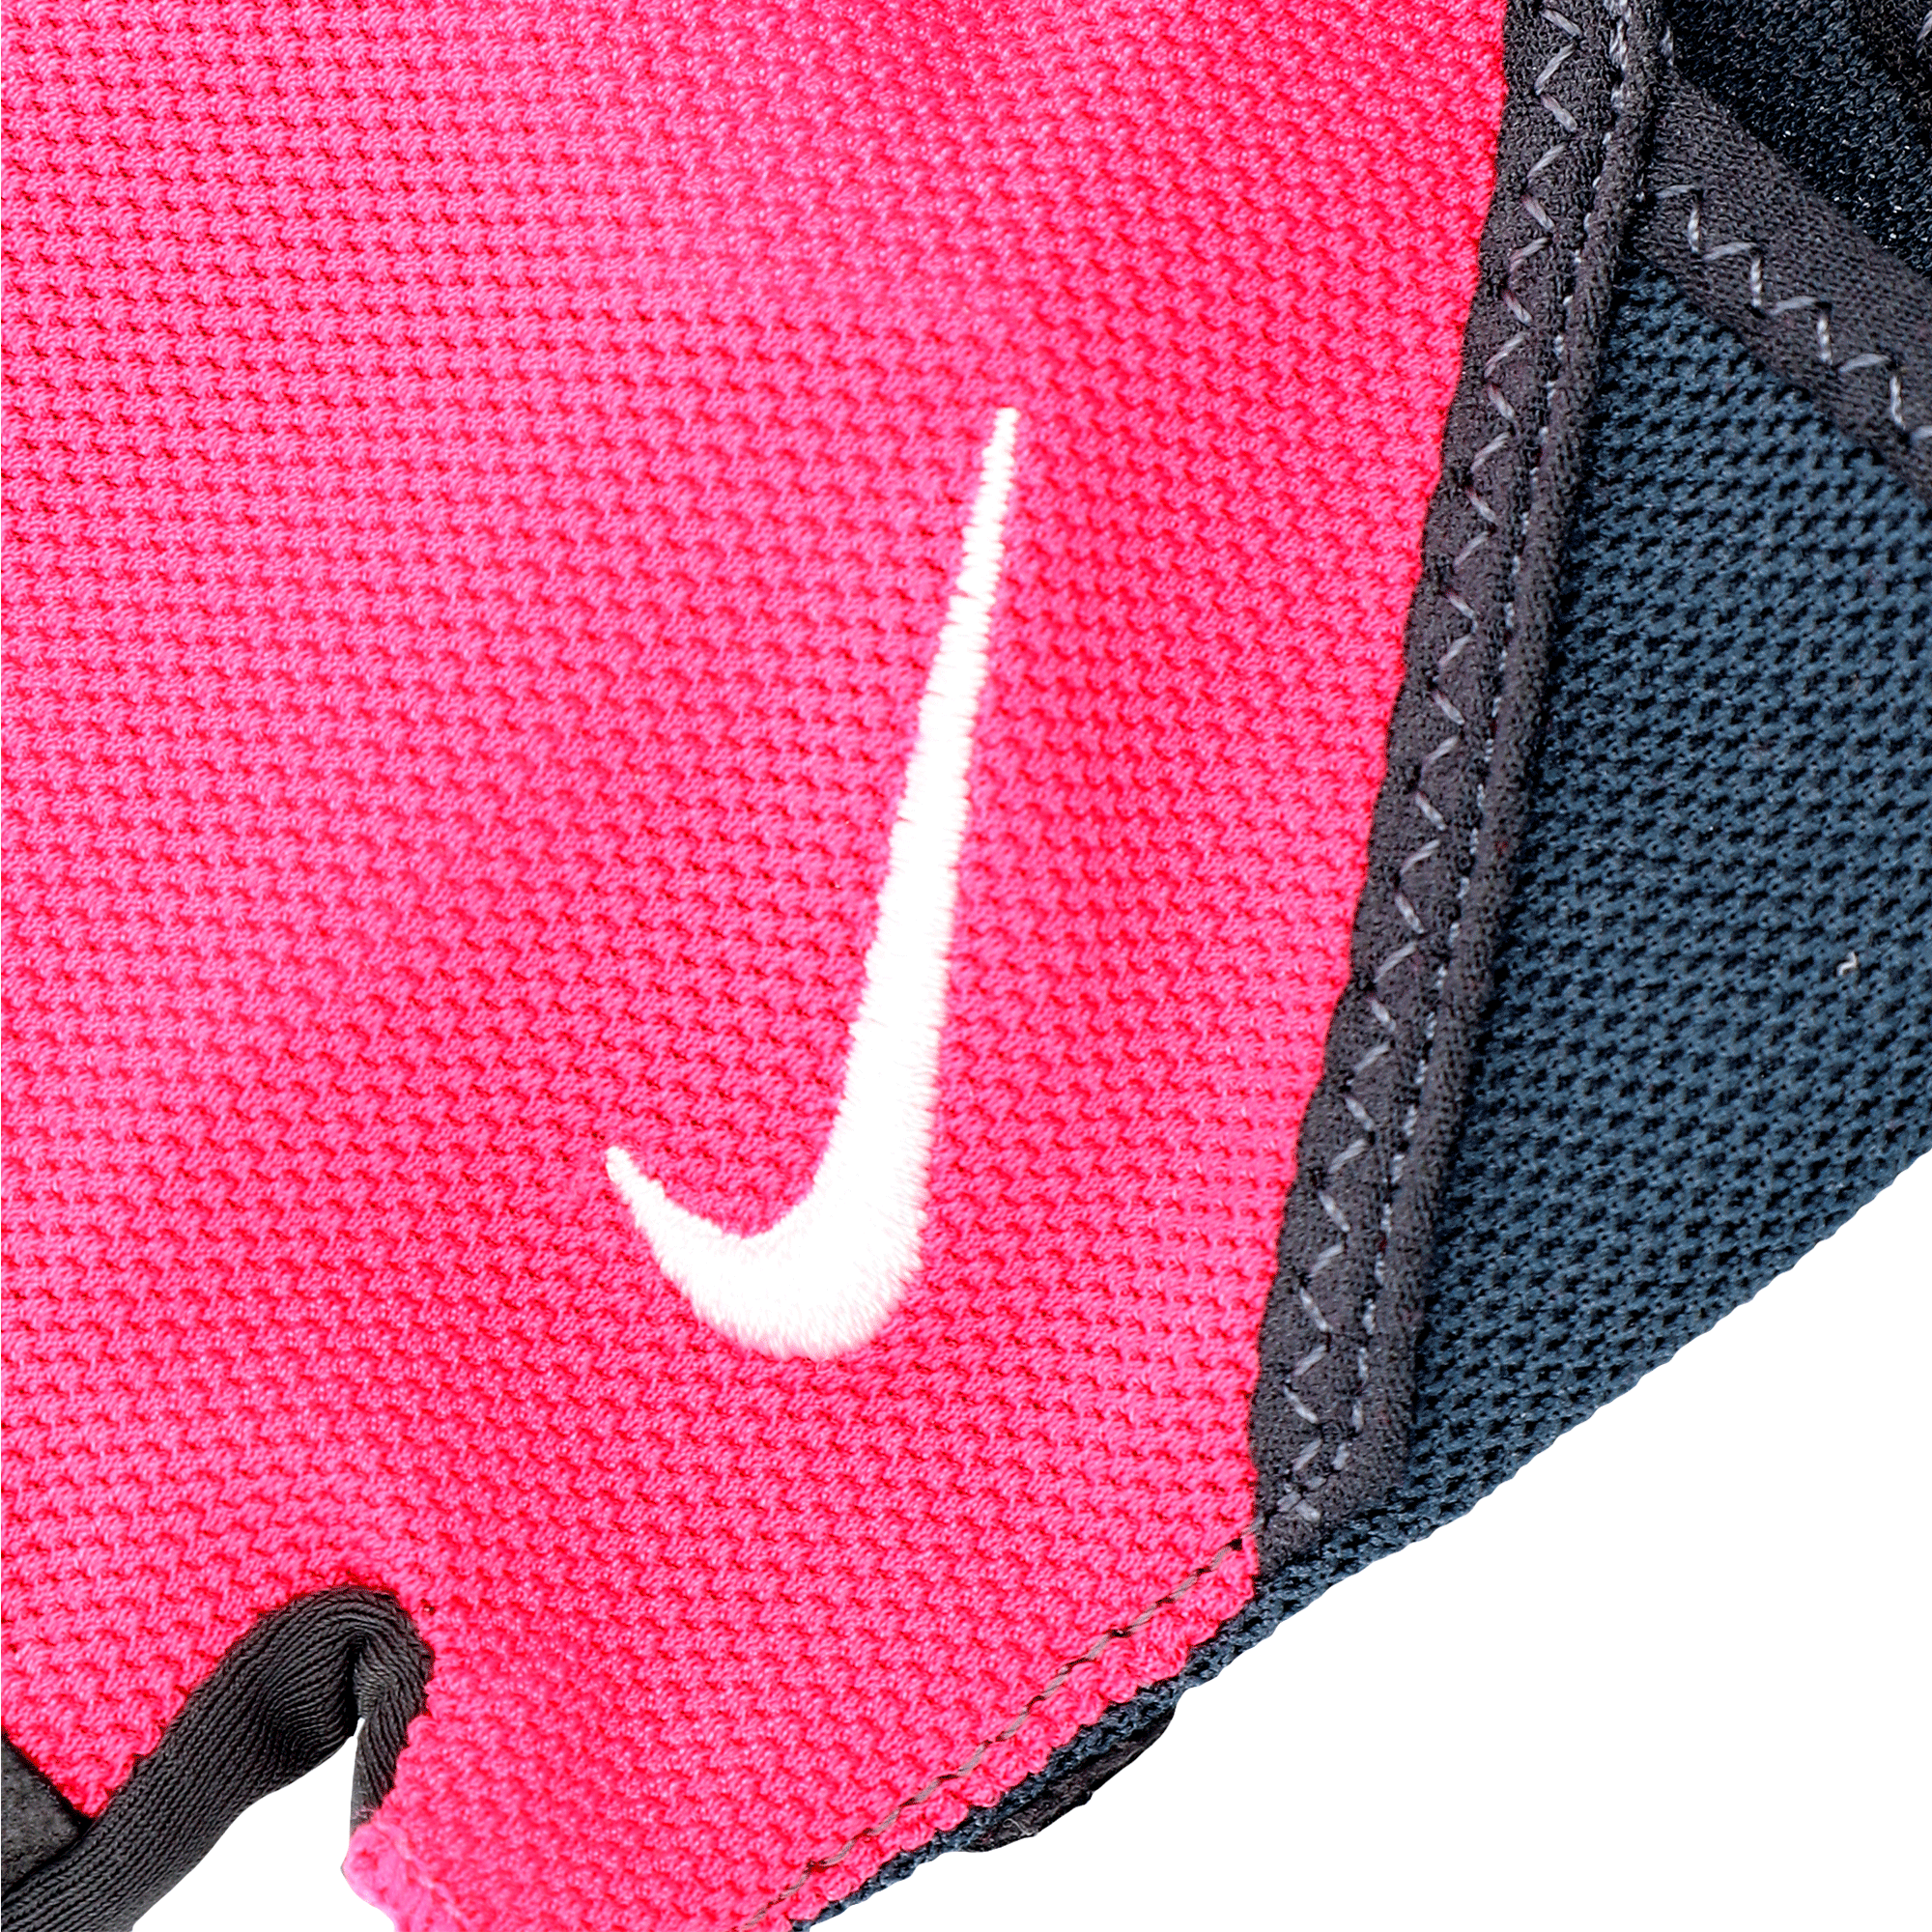 Nike Gym Essential Fitness Guantes Entrenamiento Mujer Vivid Pink